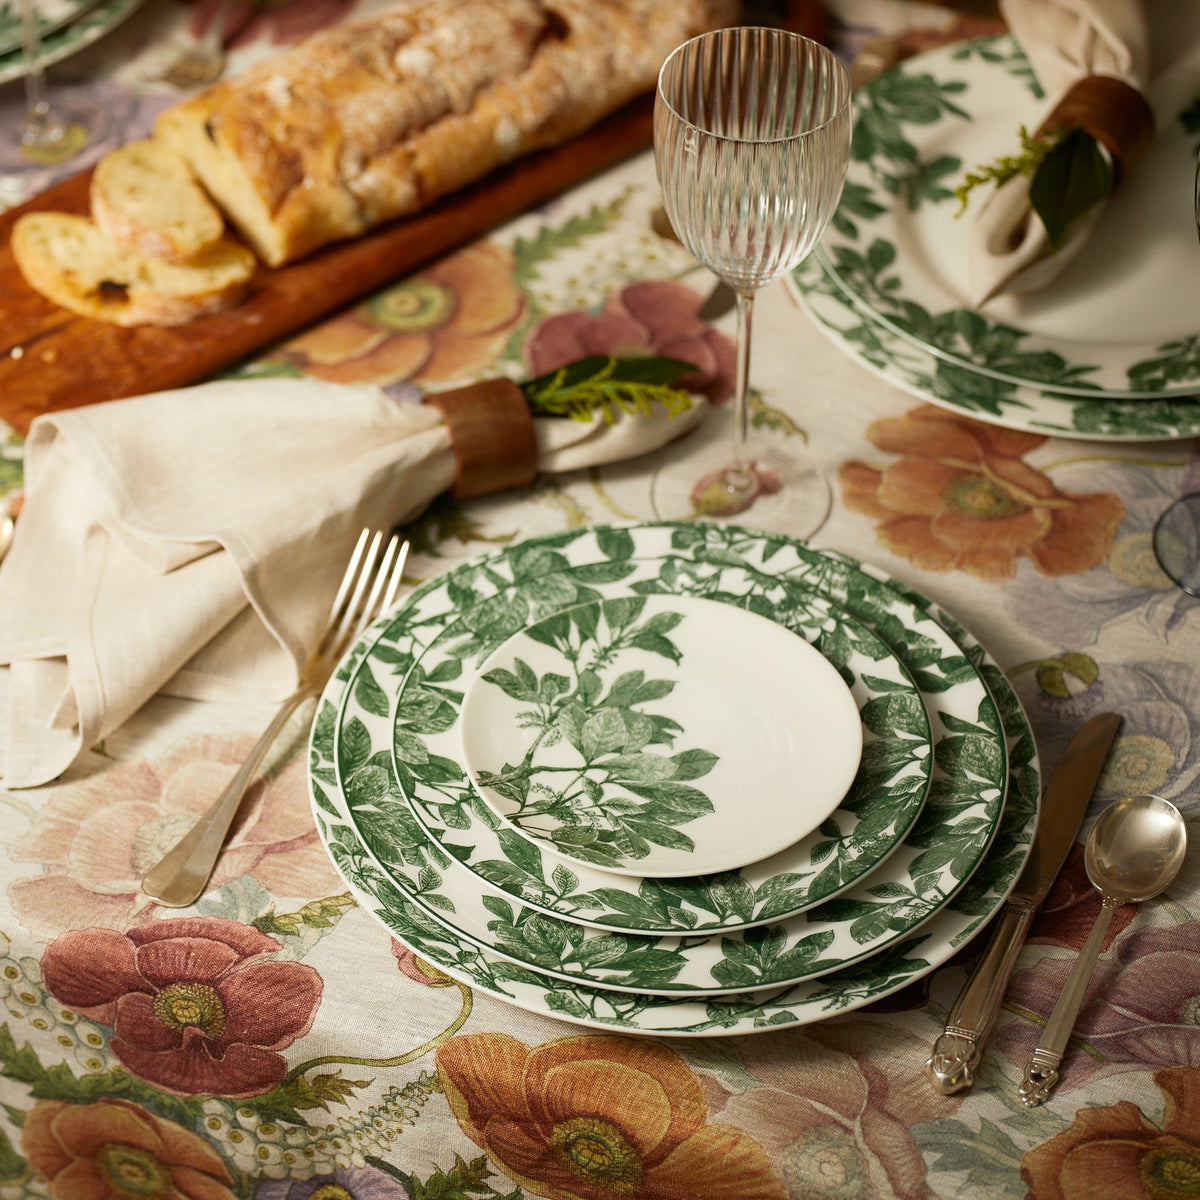 A Caskata Arbor Green Dinner Plate with a green and white floral pattern.